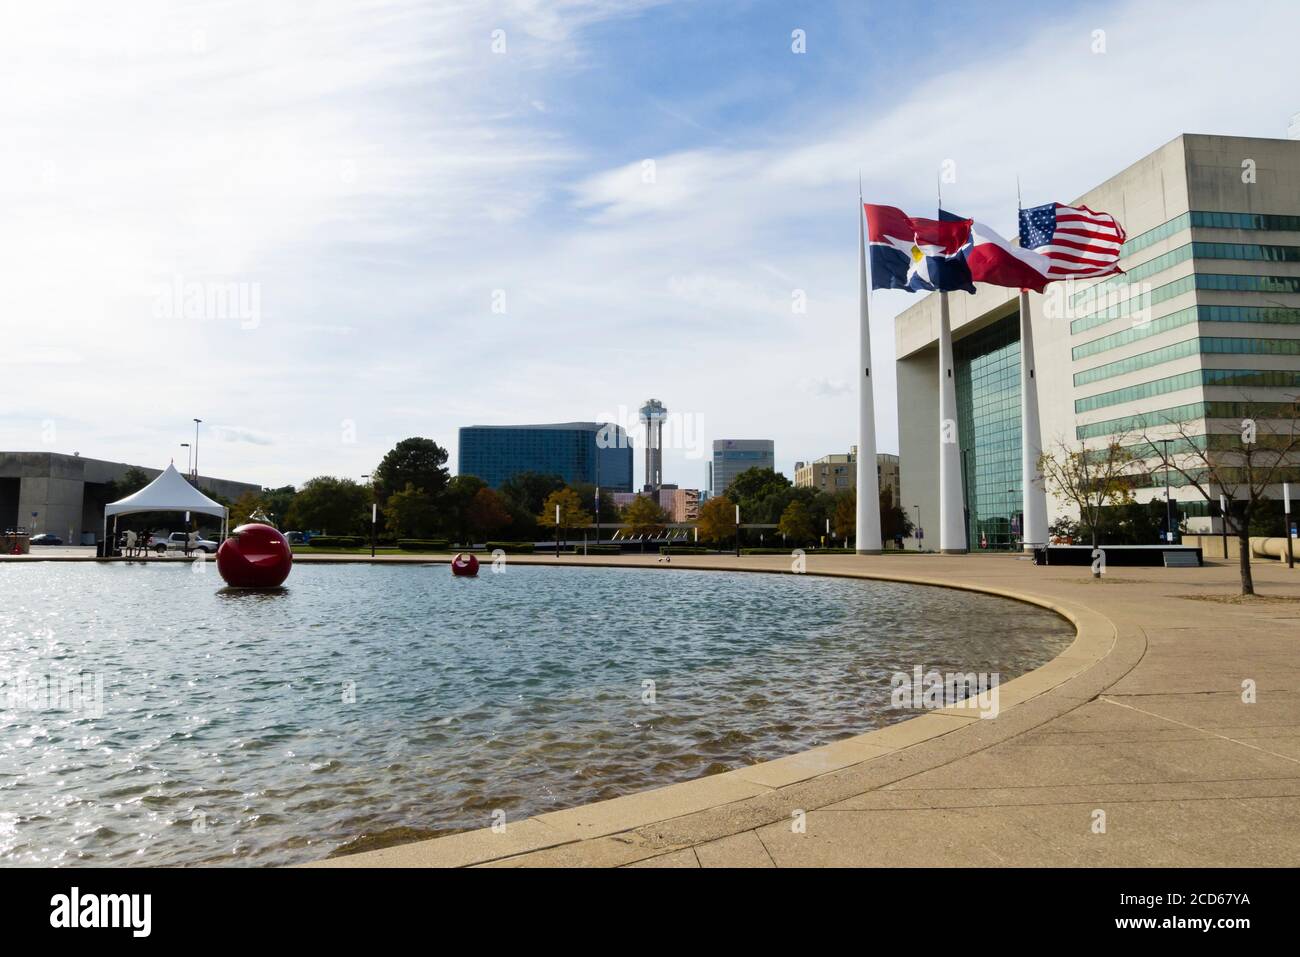 Pond and Flags on Akard Plaza of Dallas Stock Photo